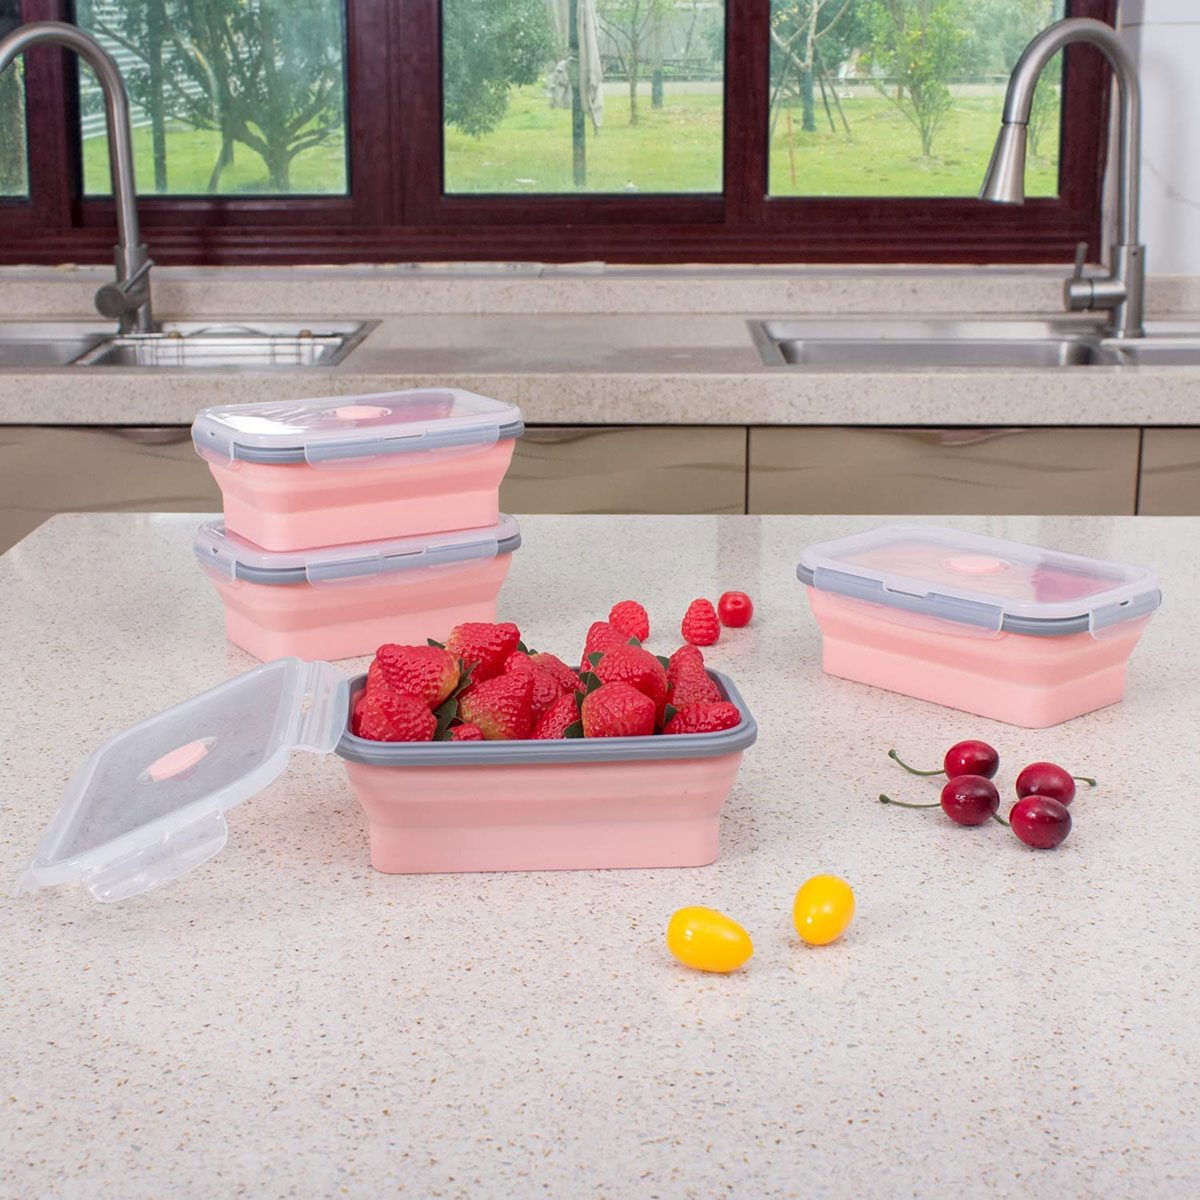 https://www.tasteofhome.com/wp-content/uploads/2023/01/collapsible-storage-containers-via-amazon.com-ecomm.jpg?fit=700%2C700